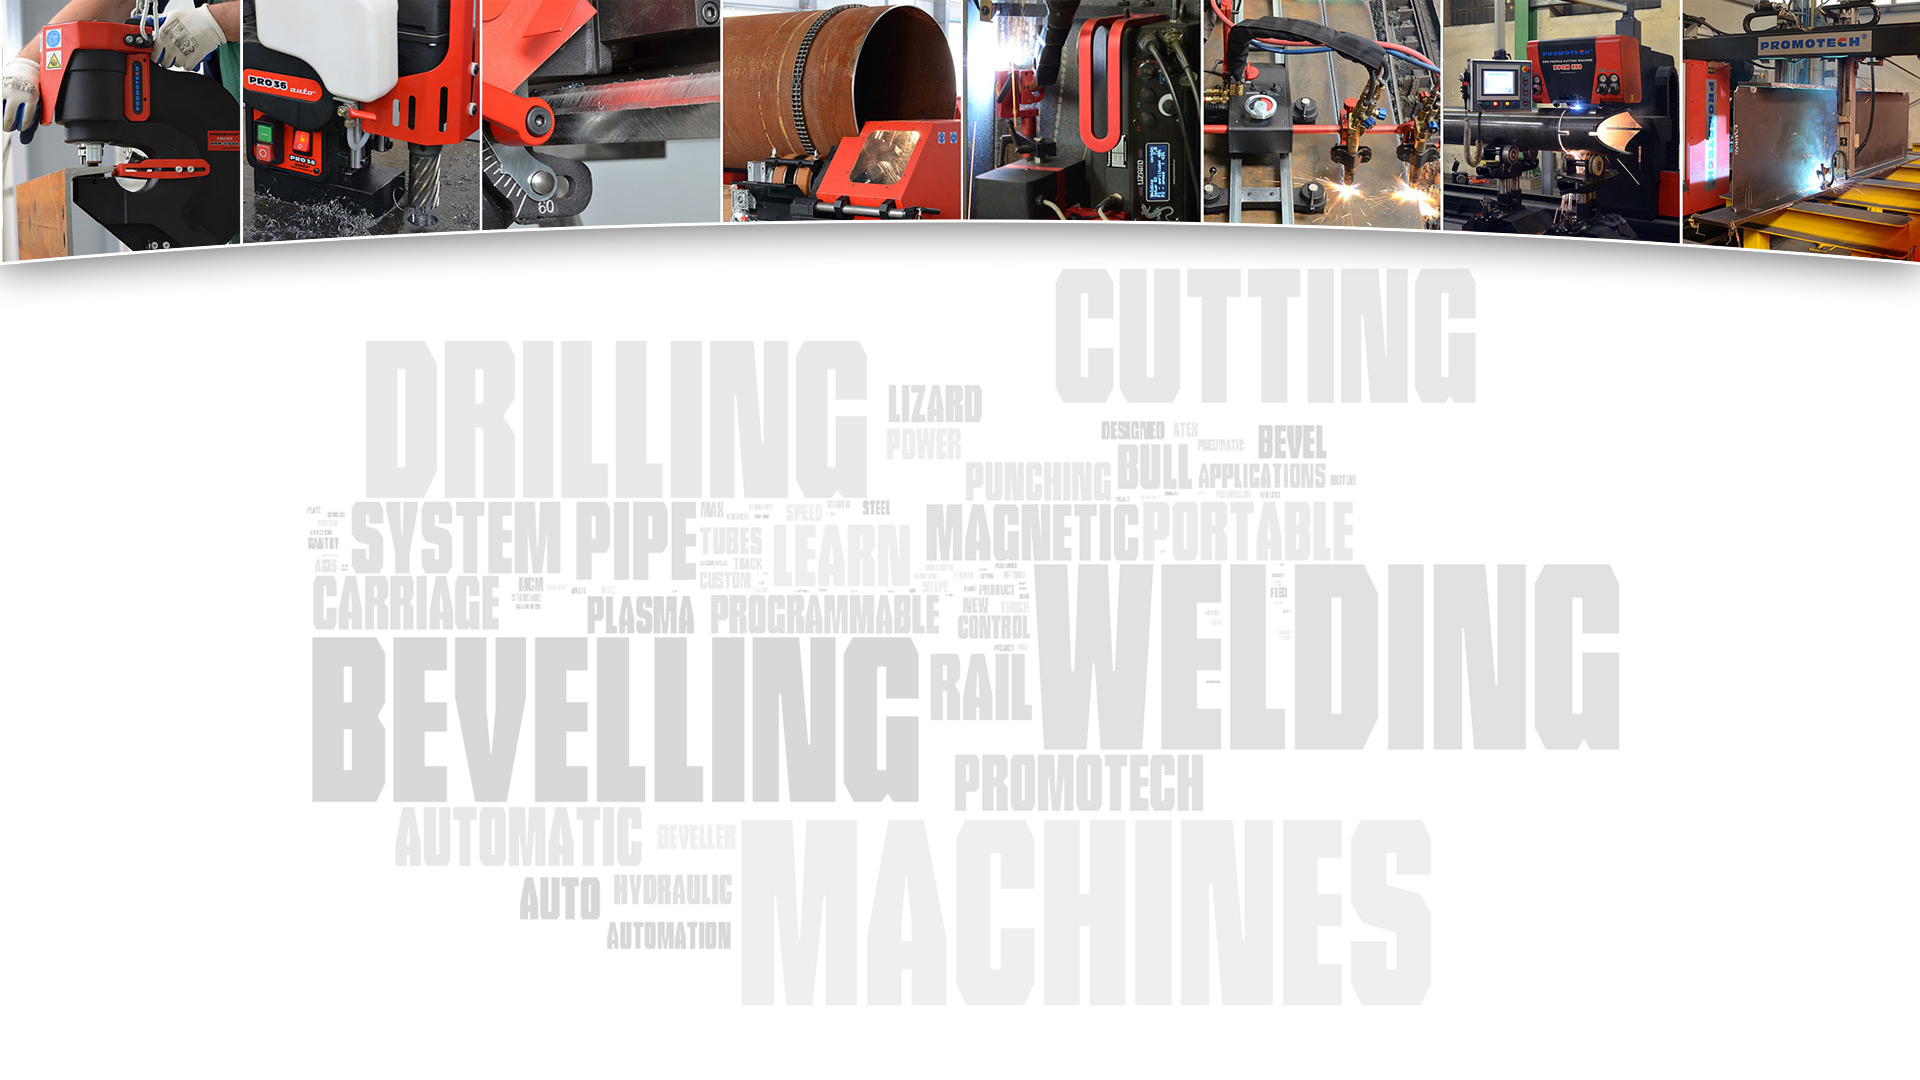 promotech-drilling-bevelling-welding-cutting-automation